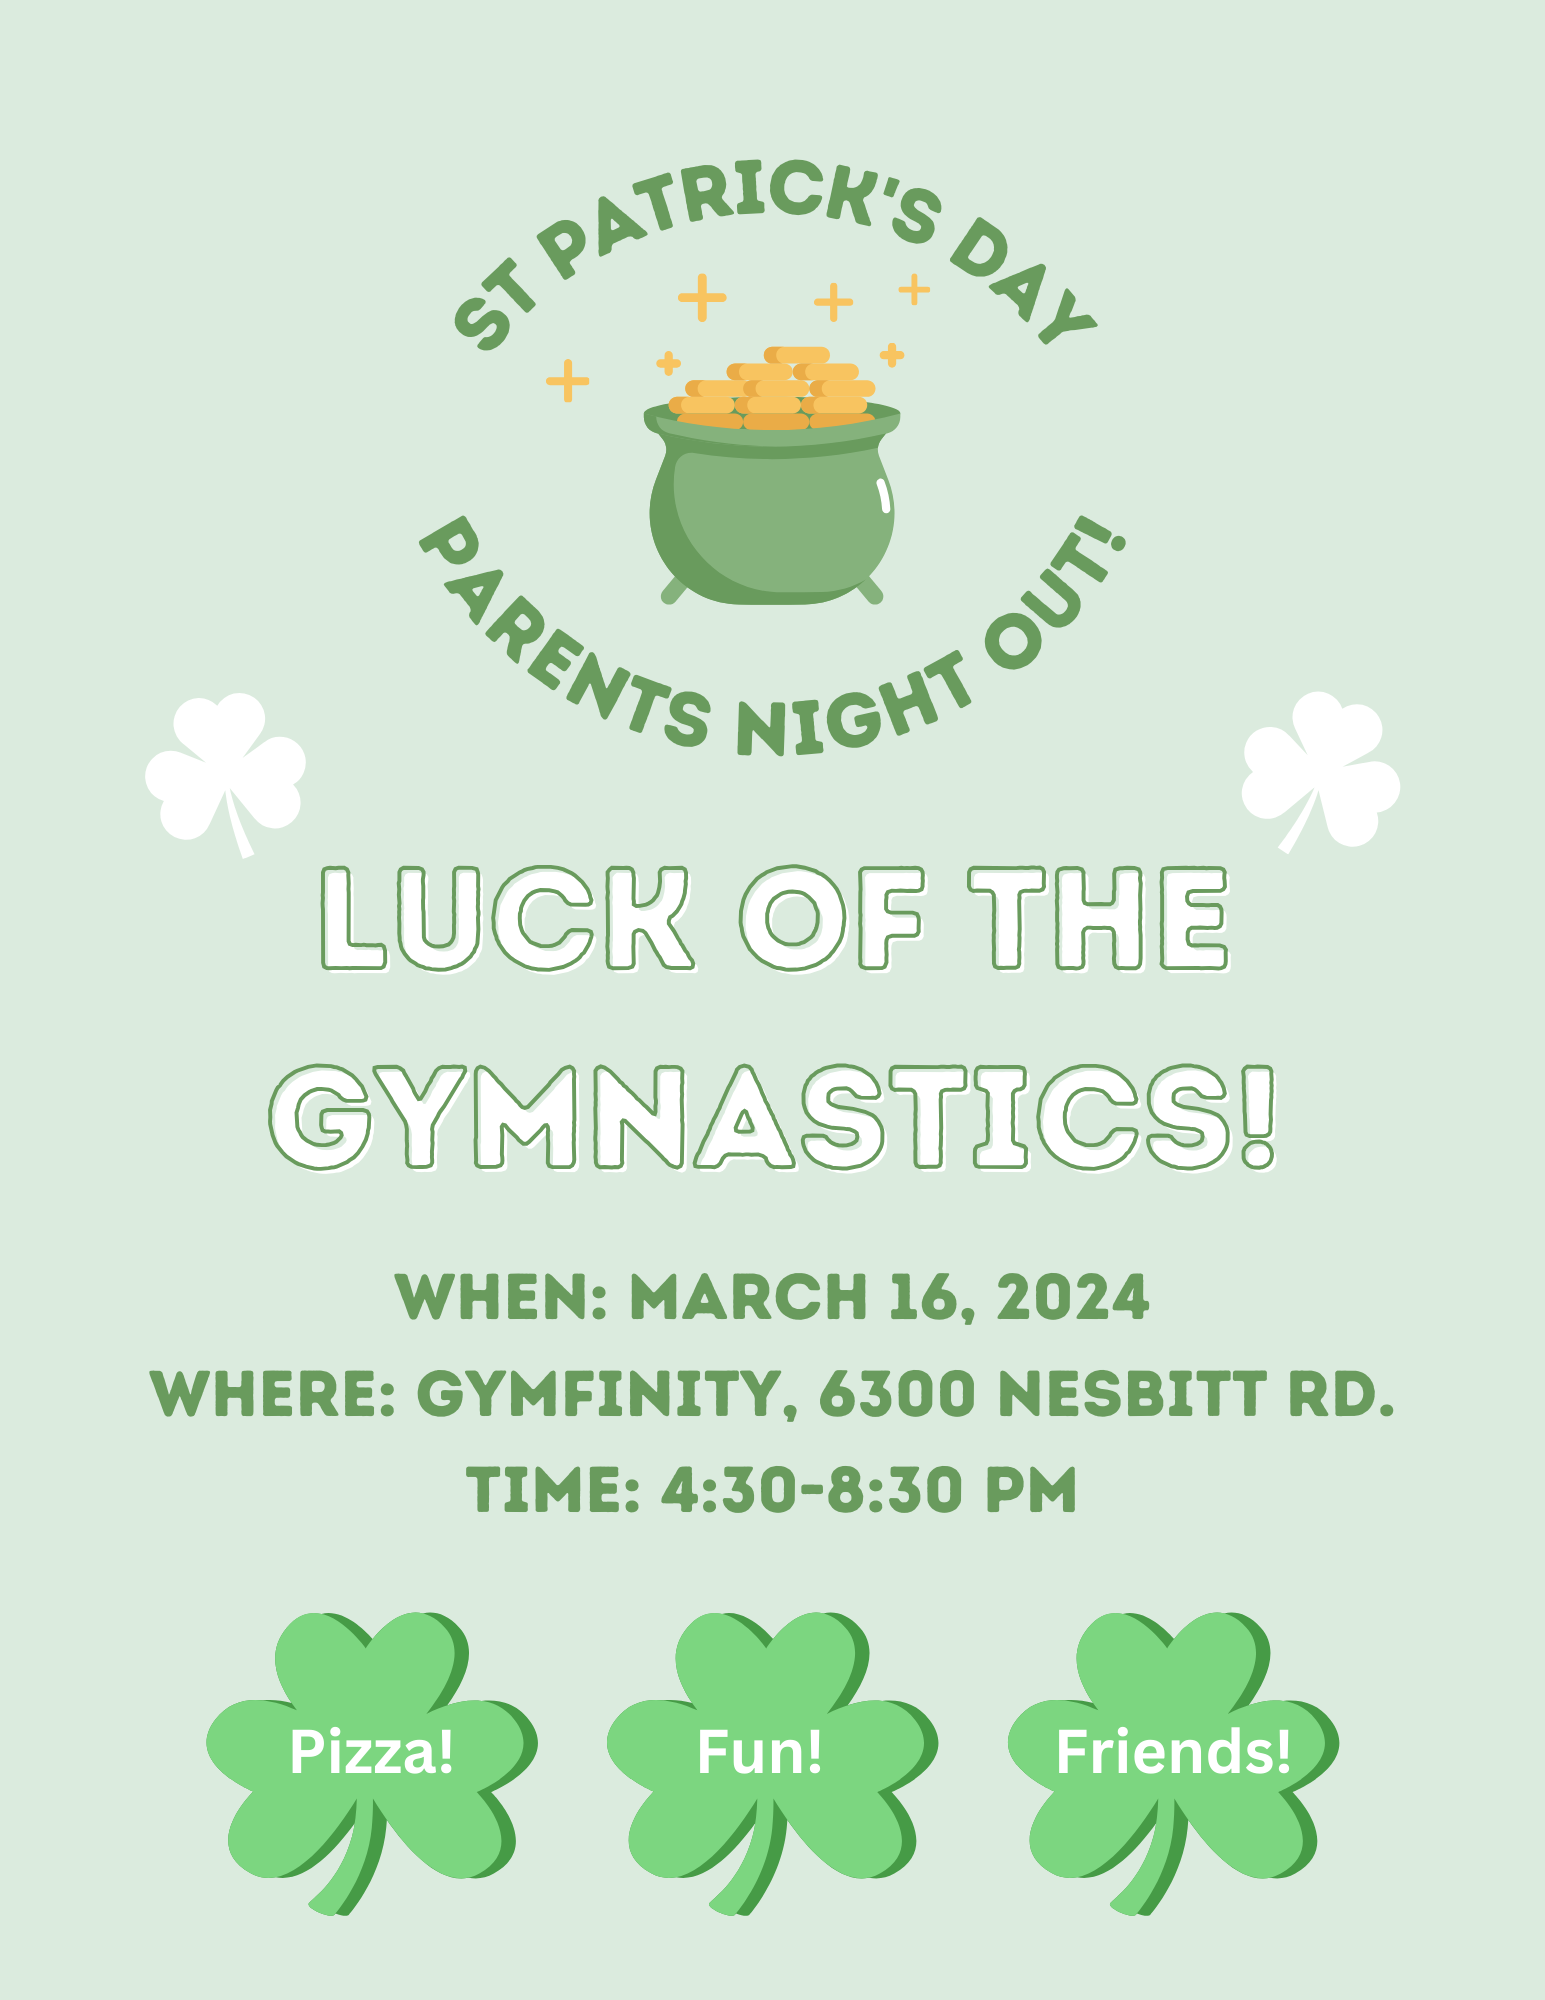 Green Saint Patricks Day Event Promotion Poster